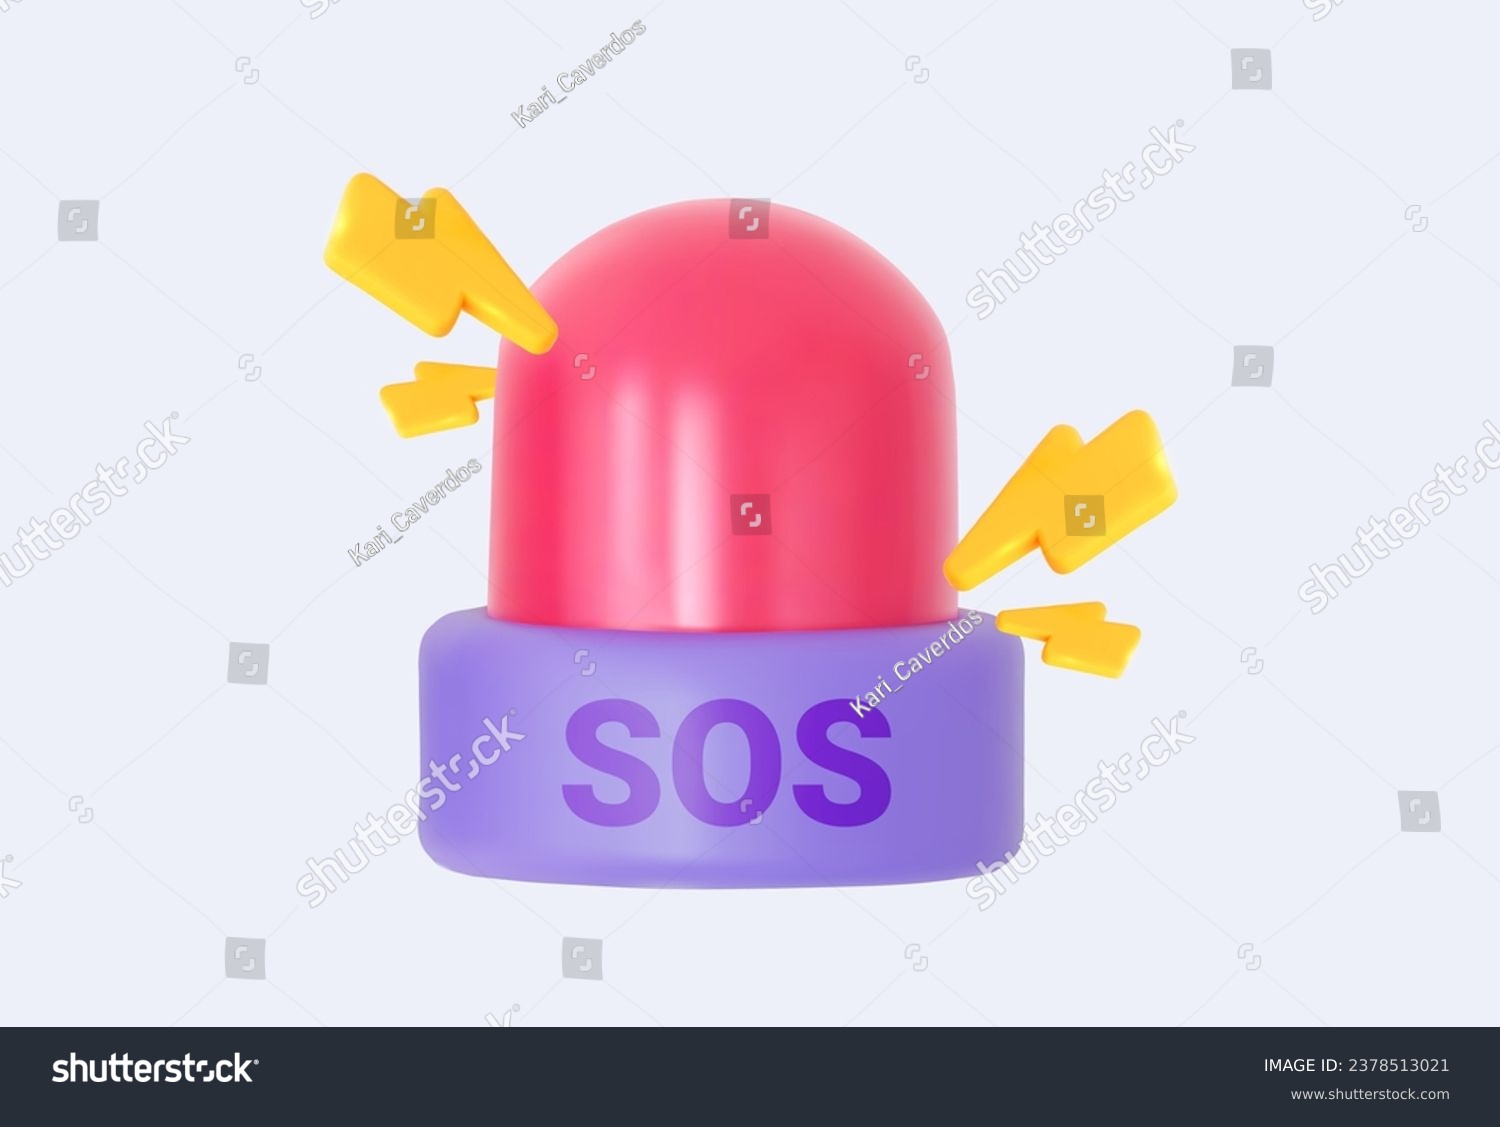 SVG of 3D siren icon. Red emergency light. Warning with flashing stop, danger sign. Danger sign cartoon style. Vector illustration.   svg